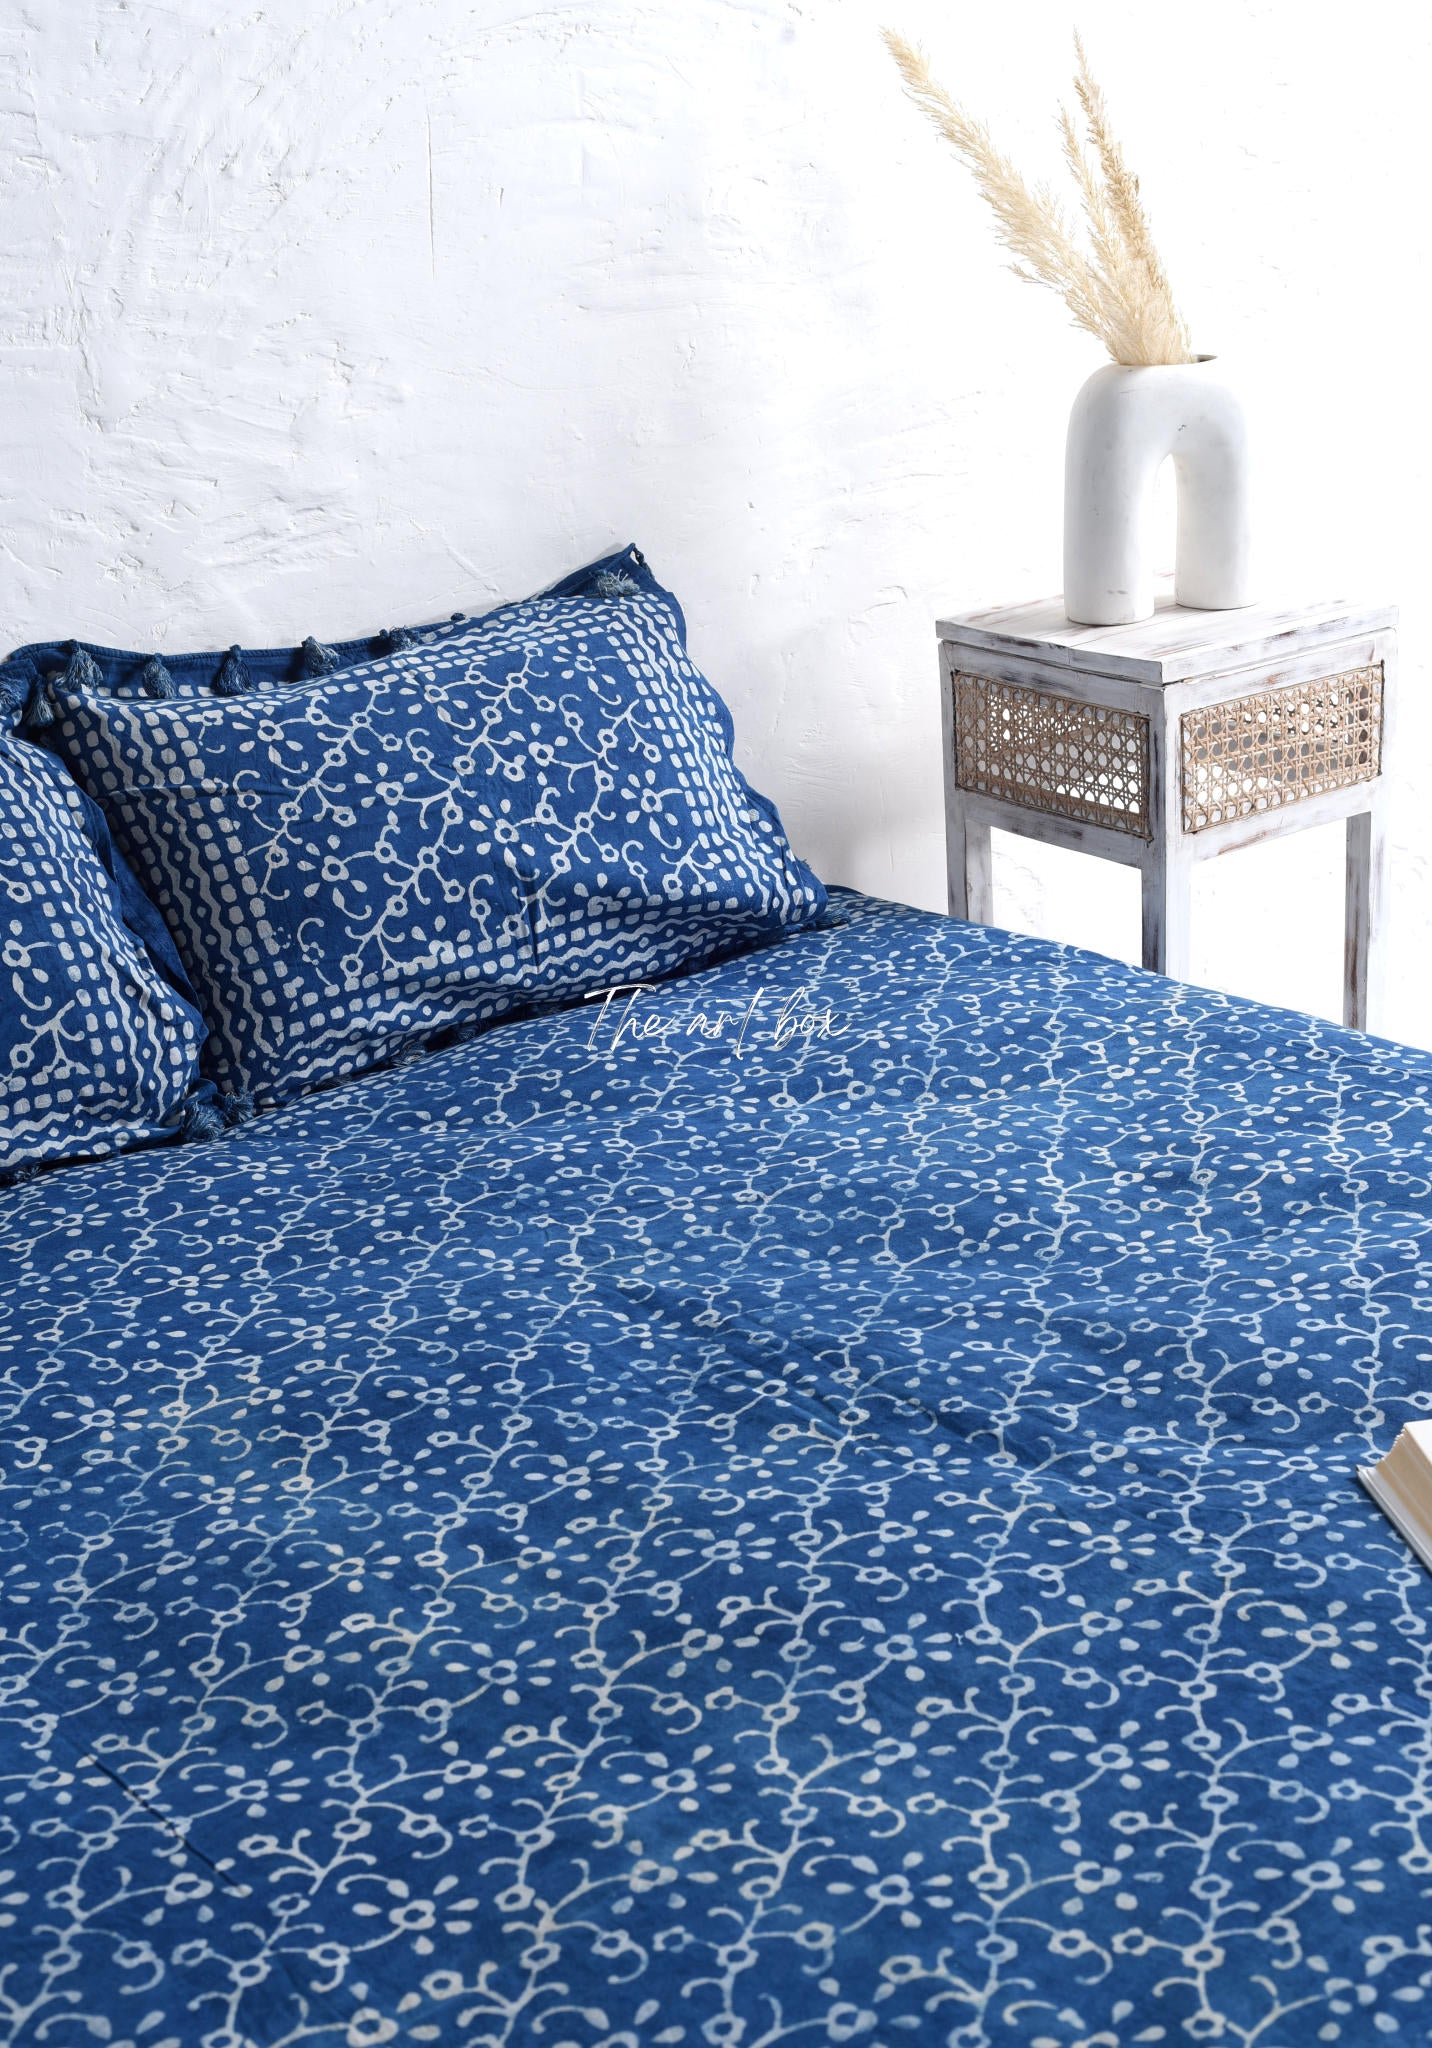 Stone Washed Luxury Block Printed Bedsheet and Pillow Set